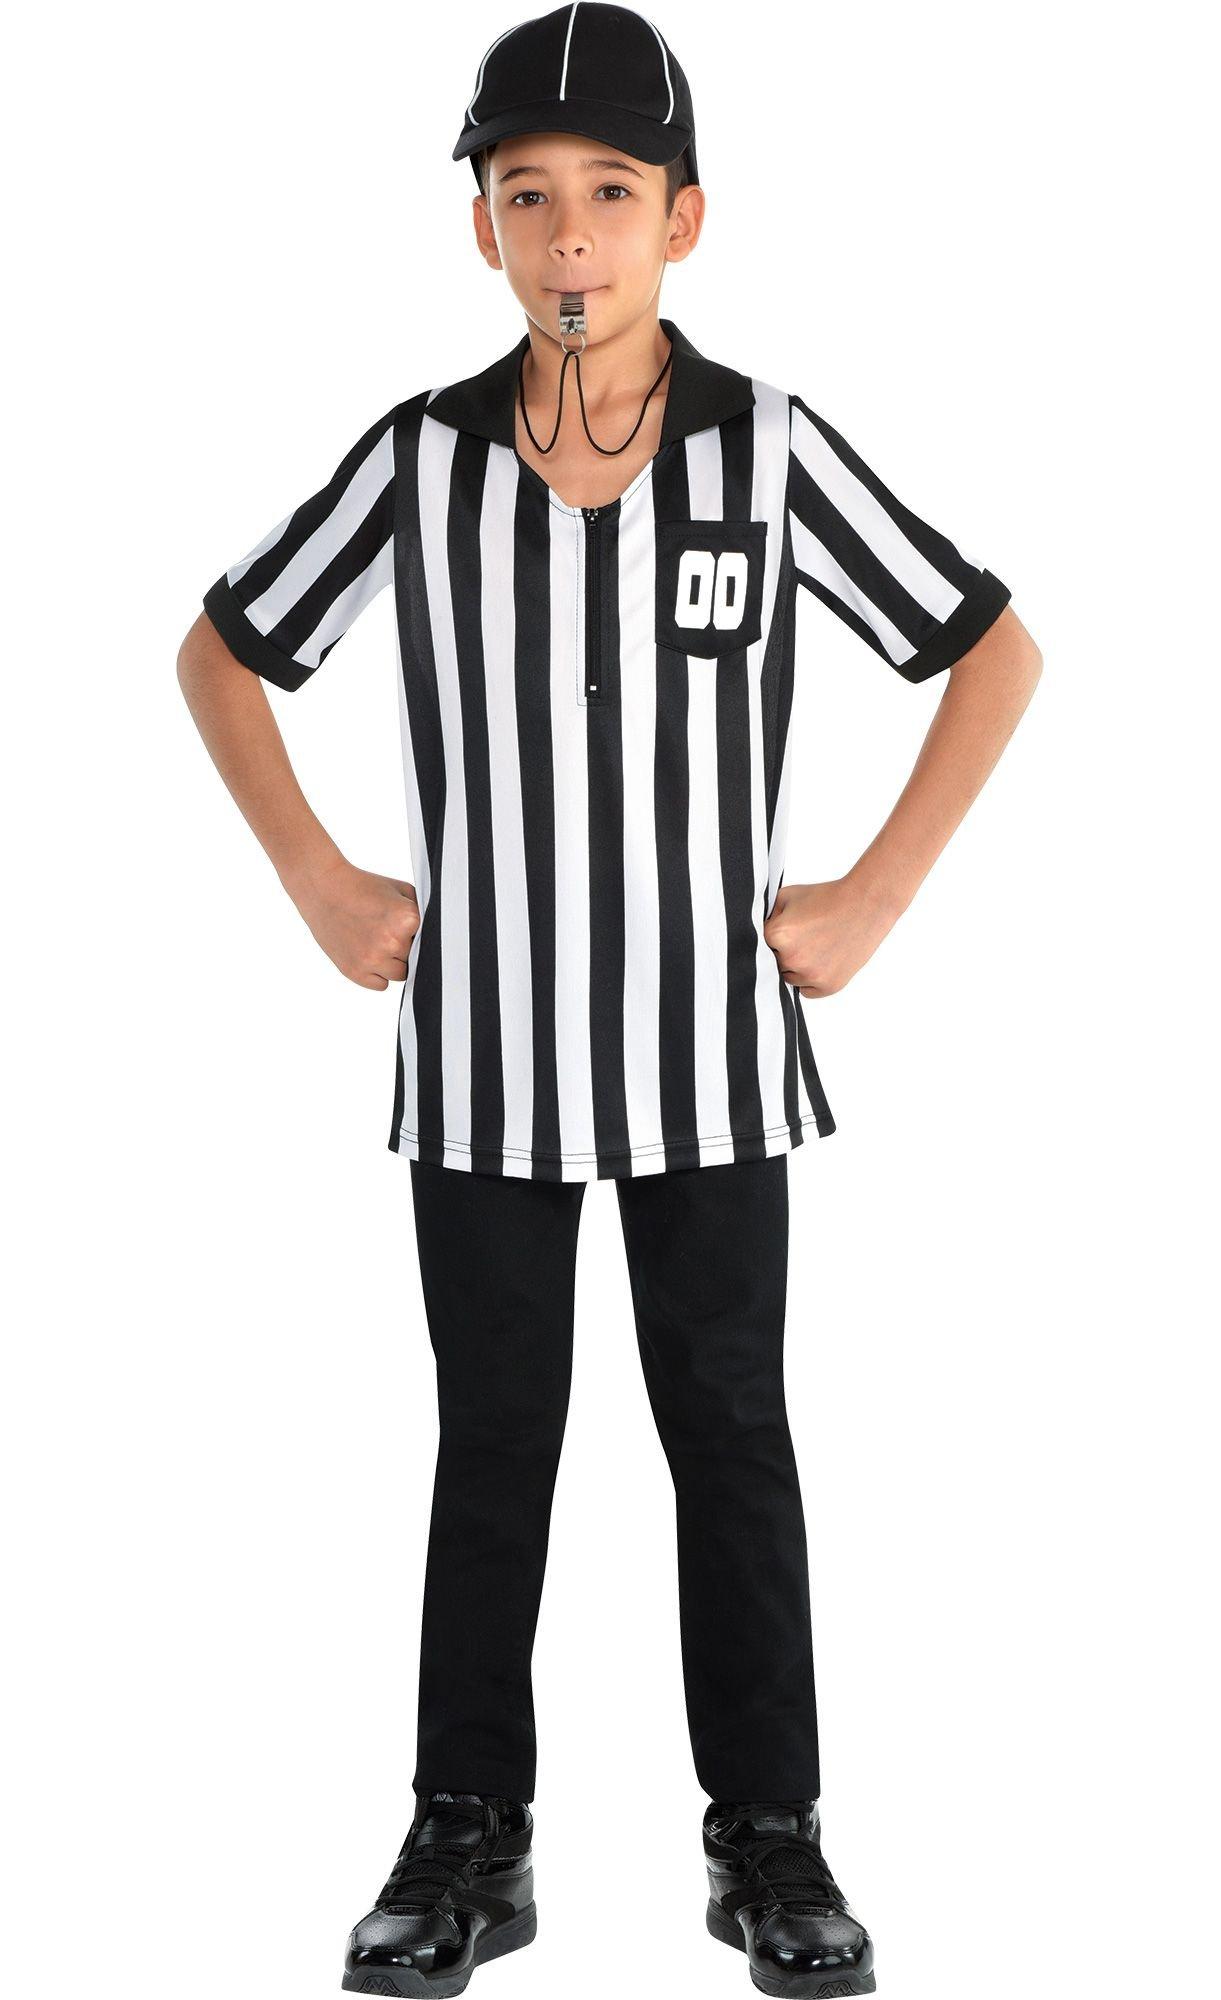 You're Out Umpire Costume 